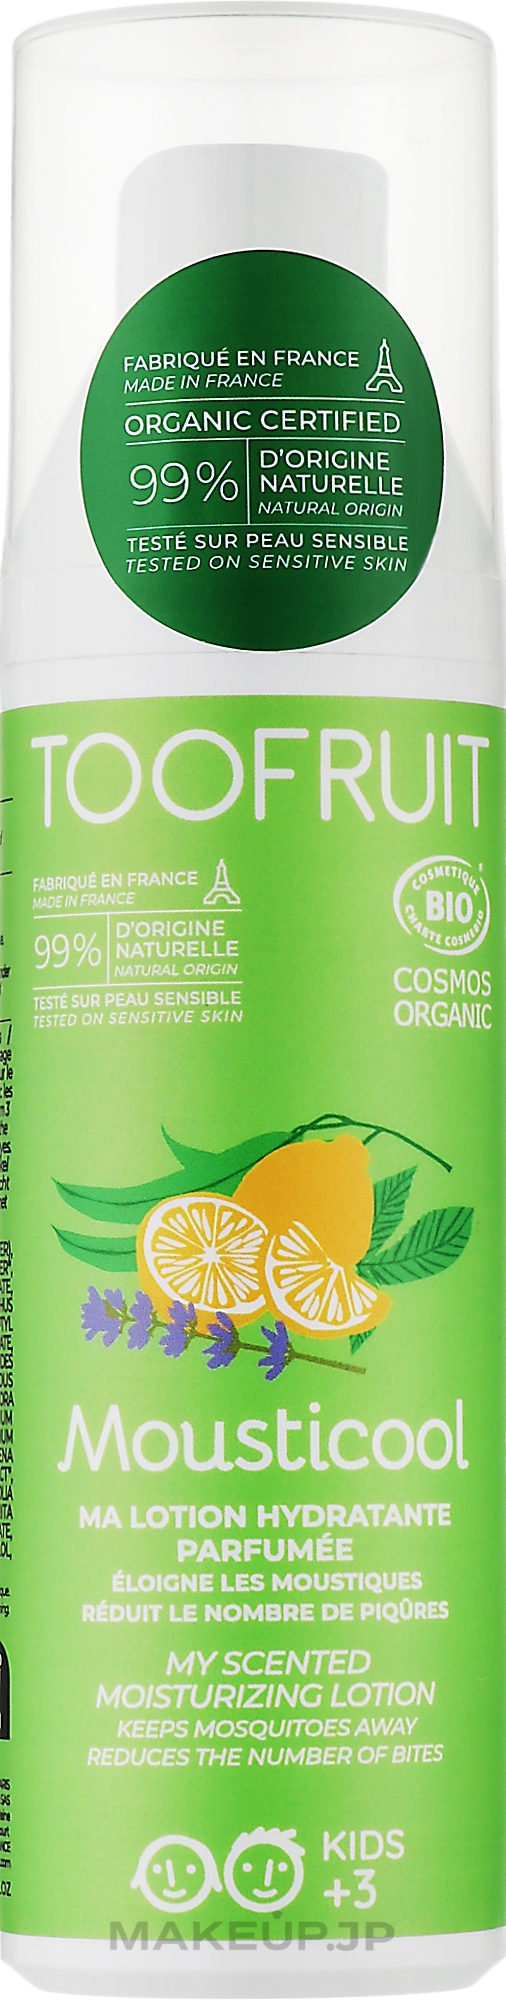 Repellent Body Lotion - Toofruit Mousticool — photo 100 ml